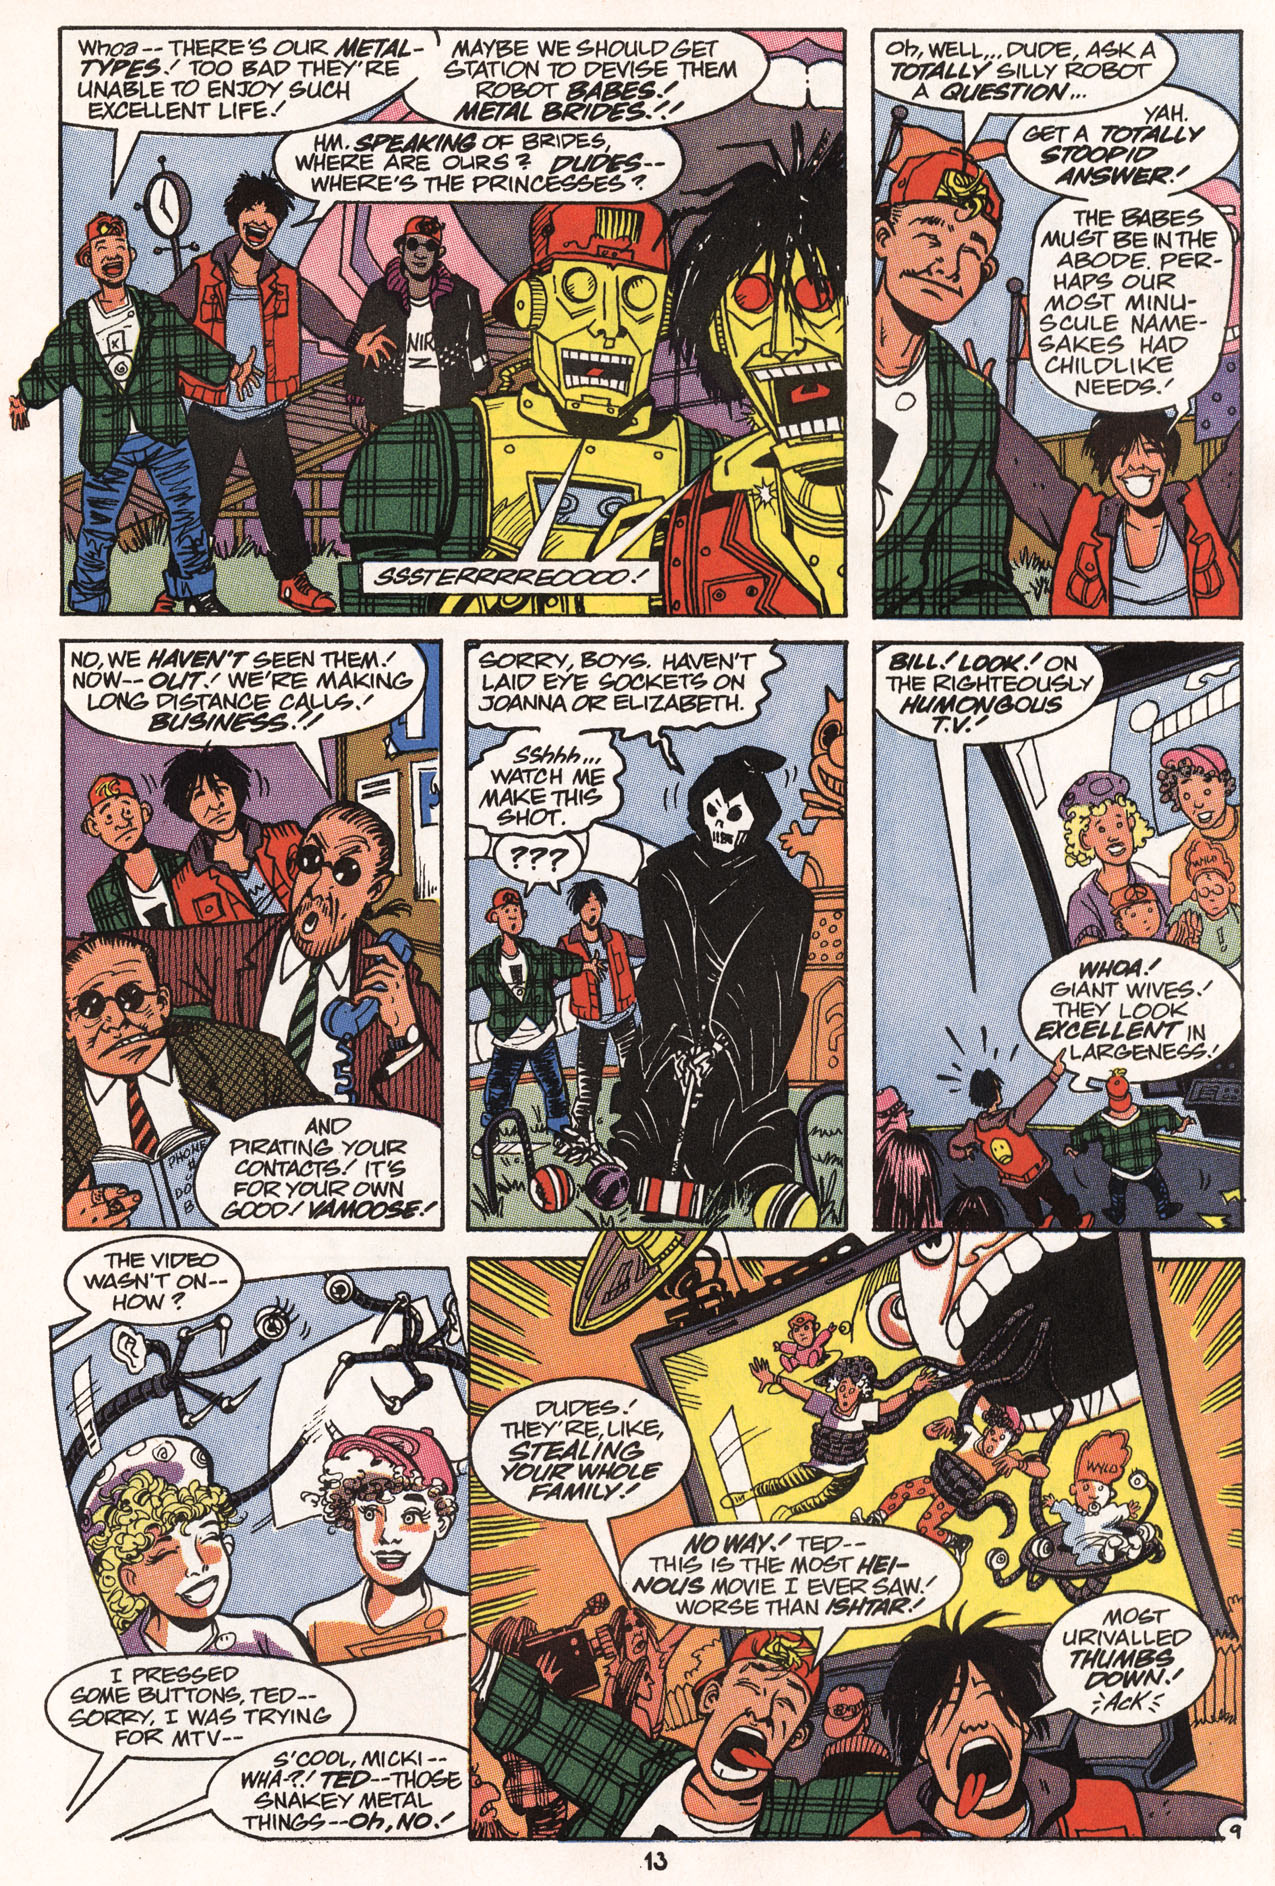 Read online Bill & Ted's Excellent Comic Book comic -  Issue #4 - 14